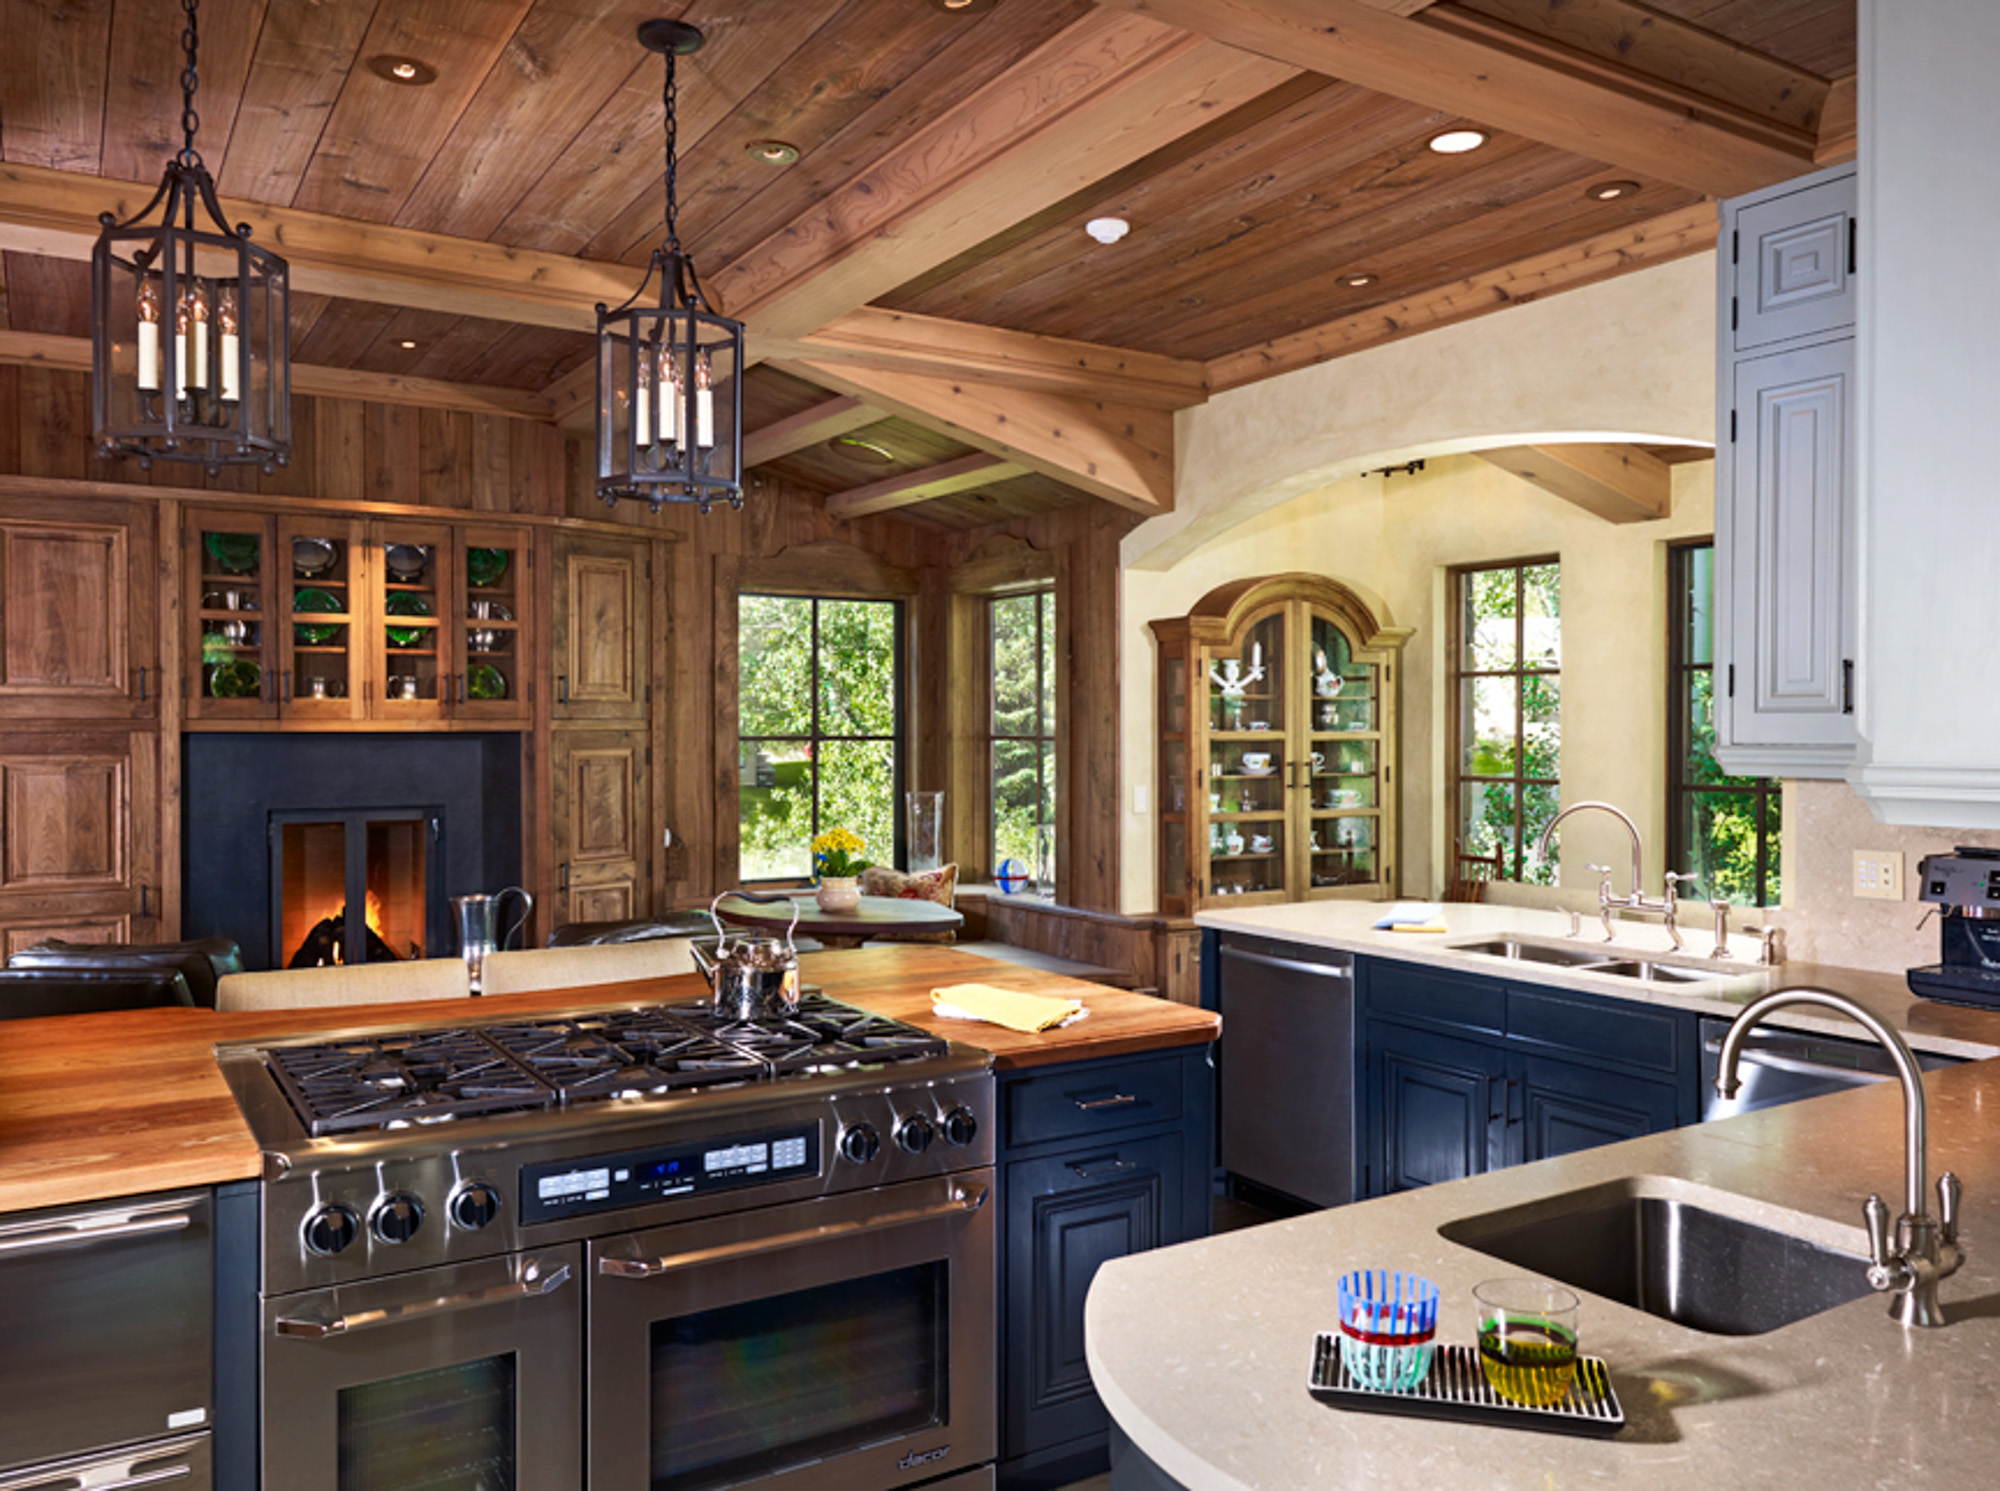 a rustic style kitchen with a fireplace and blue lower cabinets at hornsilver